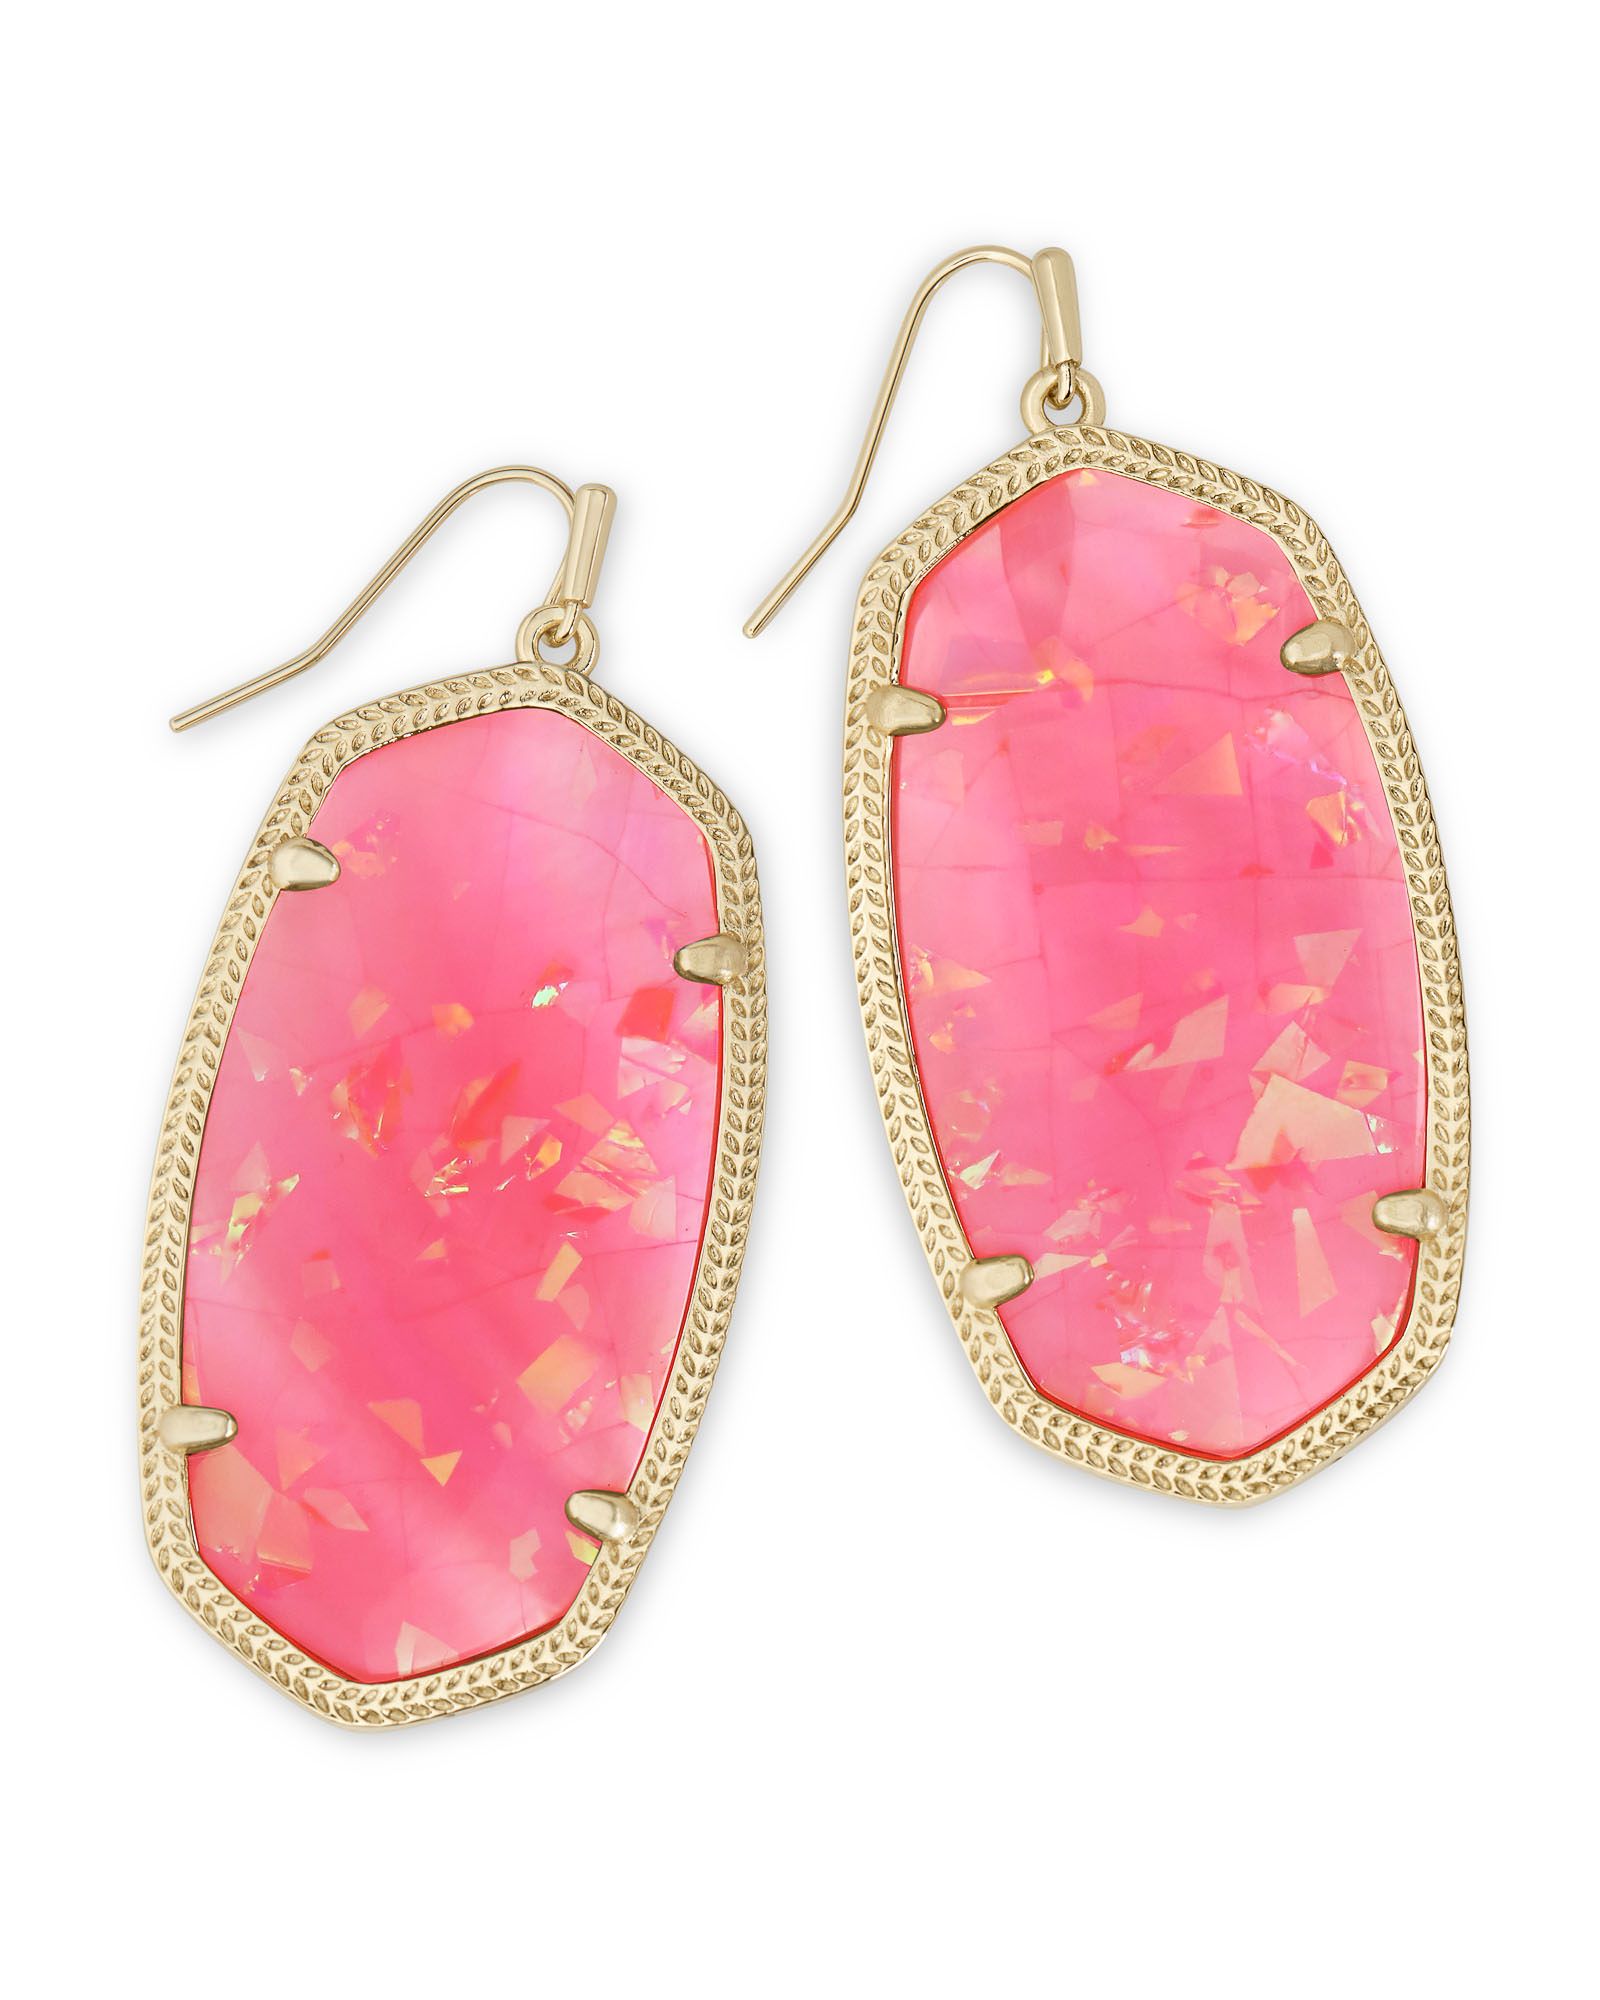 Danielle Gold Statement Earrings in Iridescent Coral Illusion | Kendra Scott